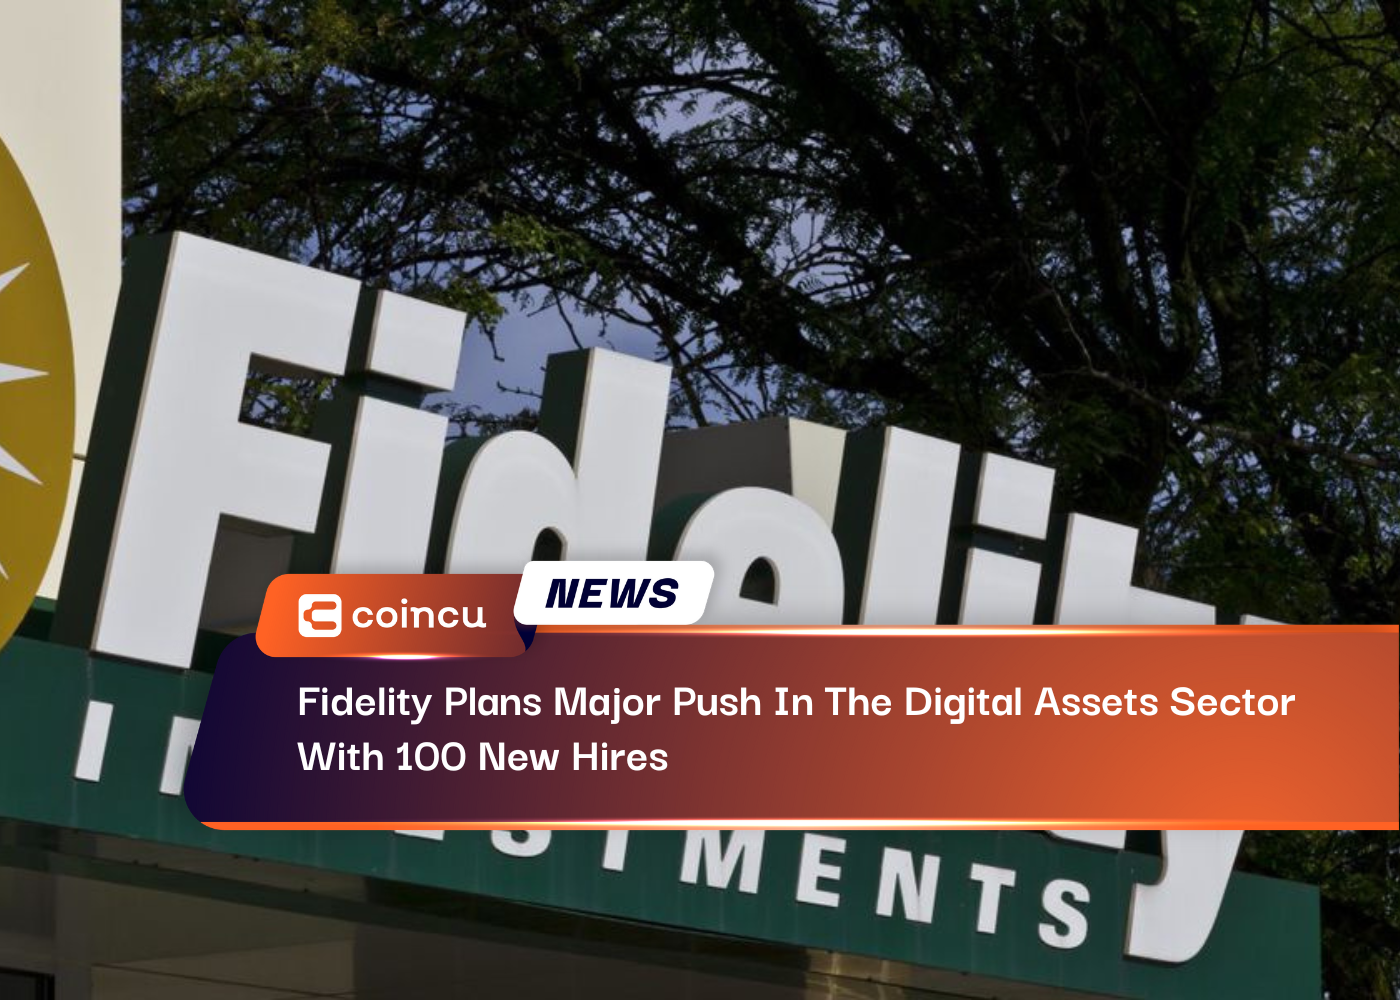 Fidelity Plans Major Push In The Digital Assets Sector